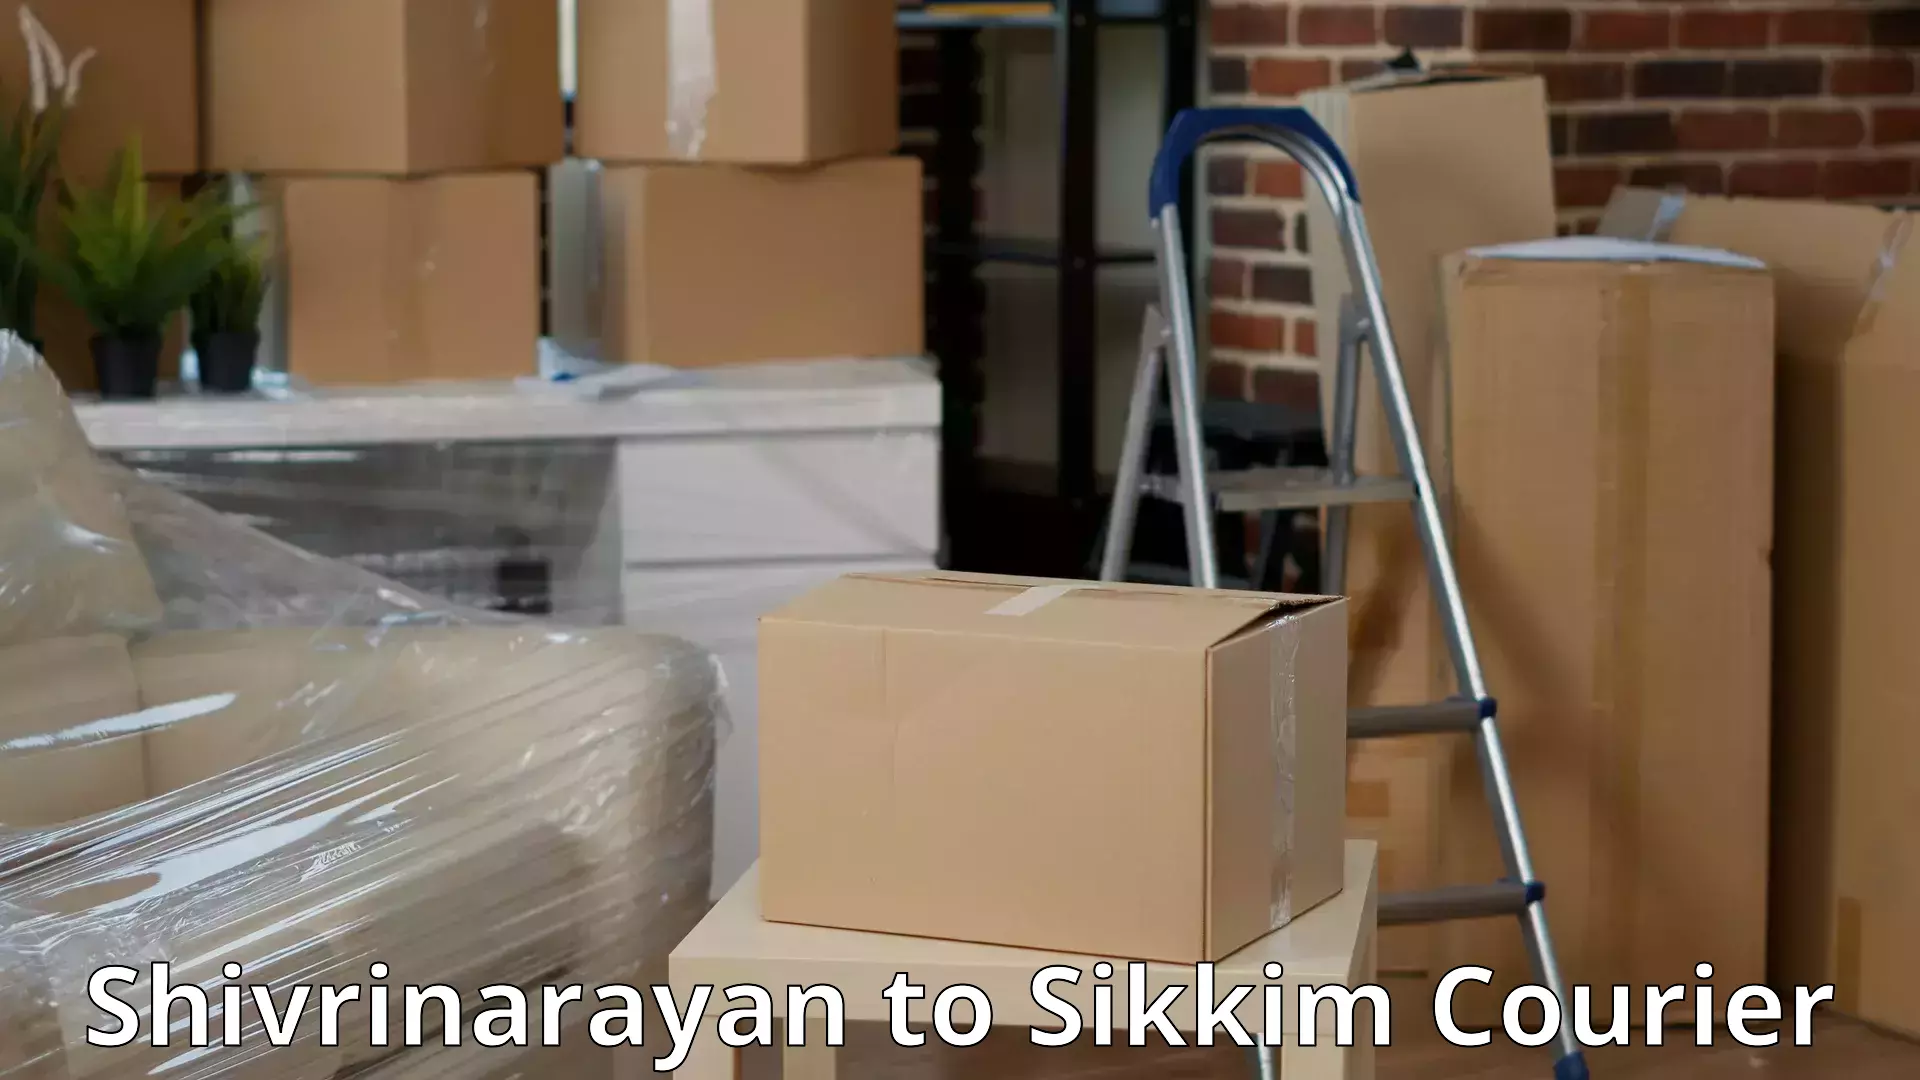 Comprehensive moving services Shivrinarayan to Pelling